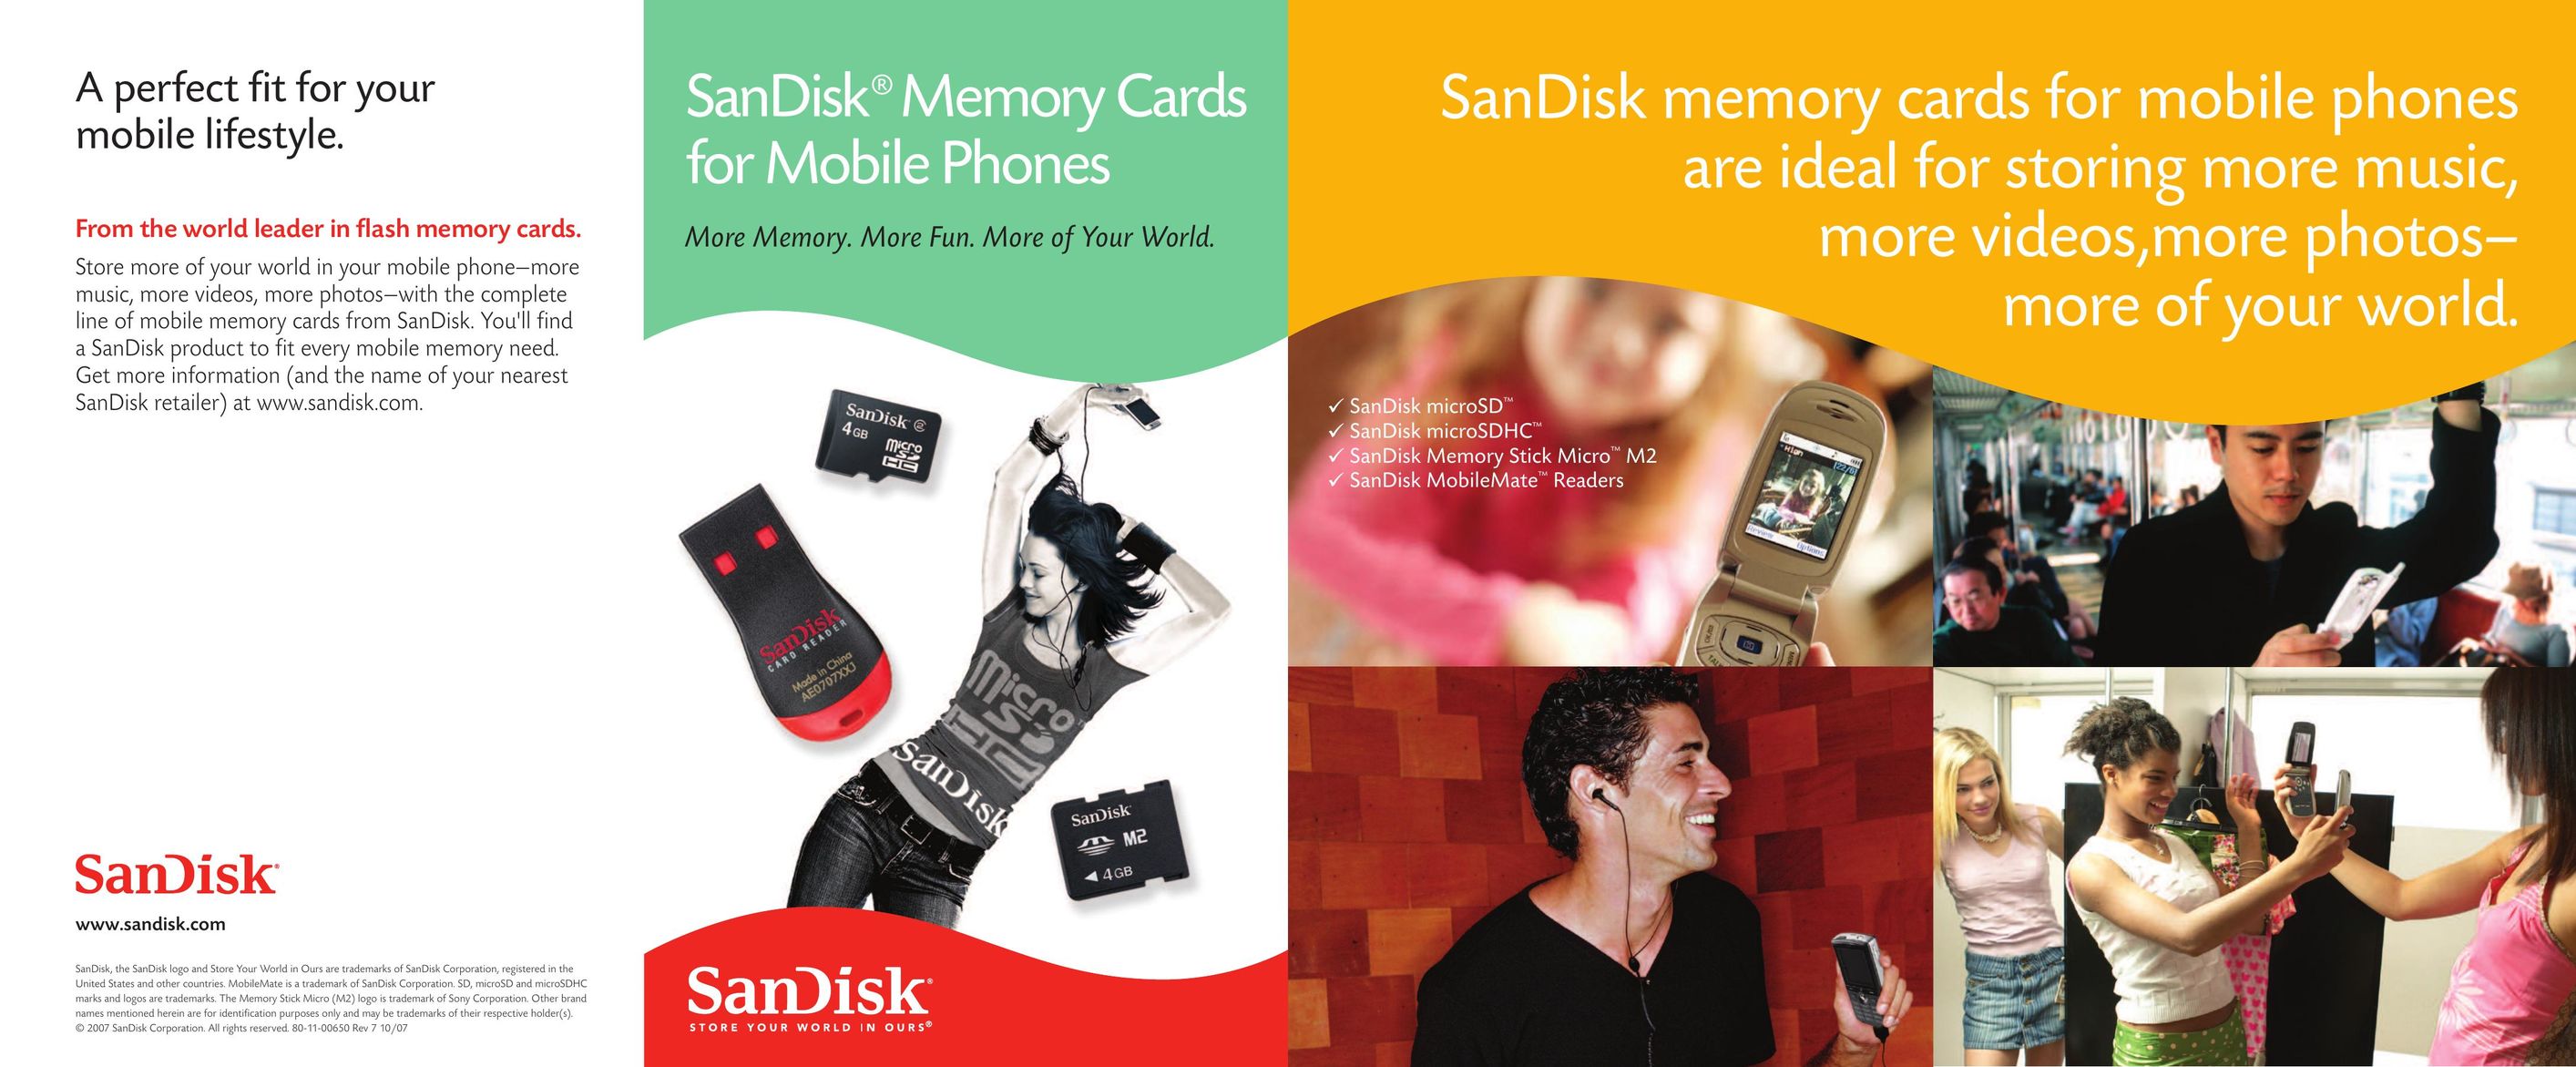 SanDisk Memory Stick Micro M2 Cell Phone Accessories User Manual